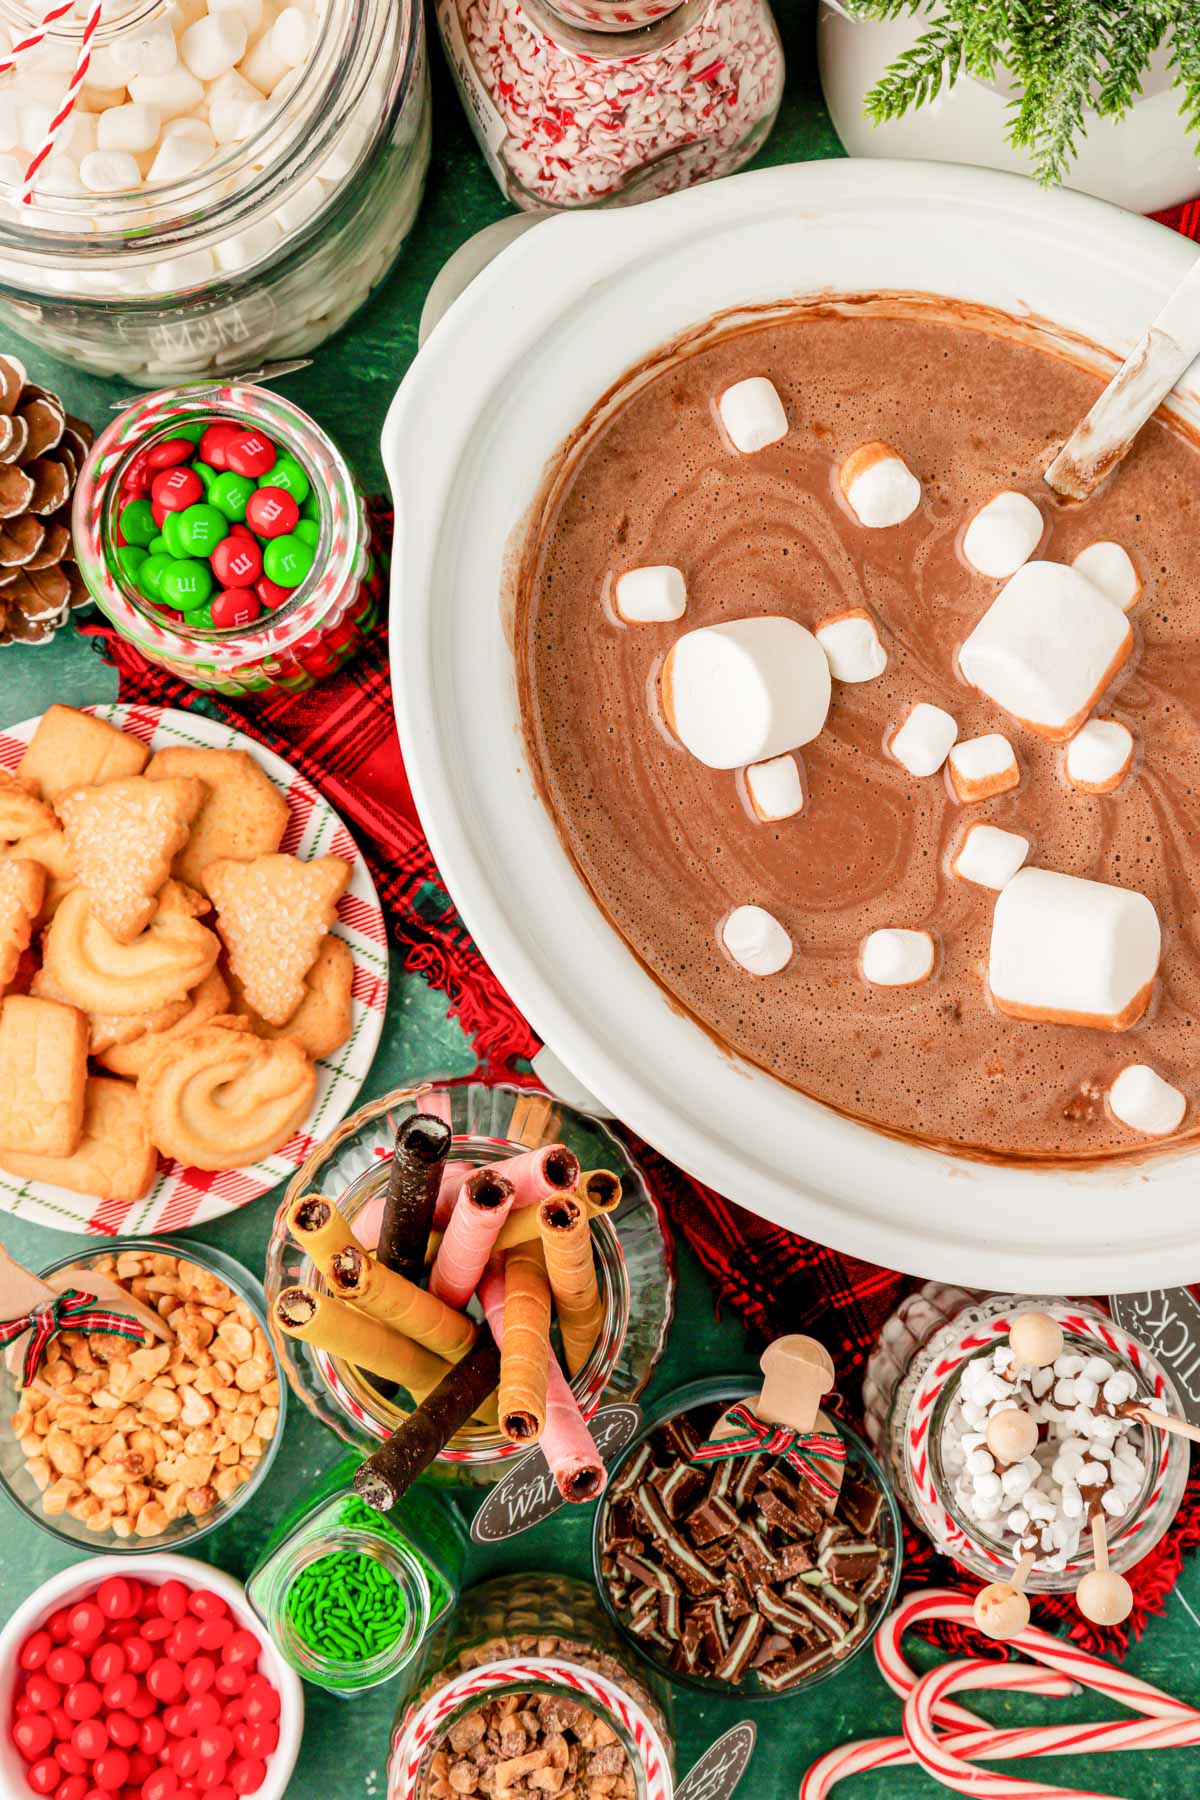 Hot Chocolate Bar (Ideas, Recipes, Toppings & More)